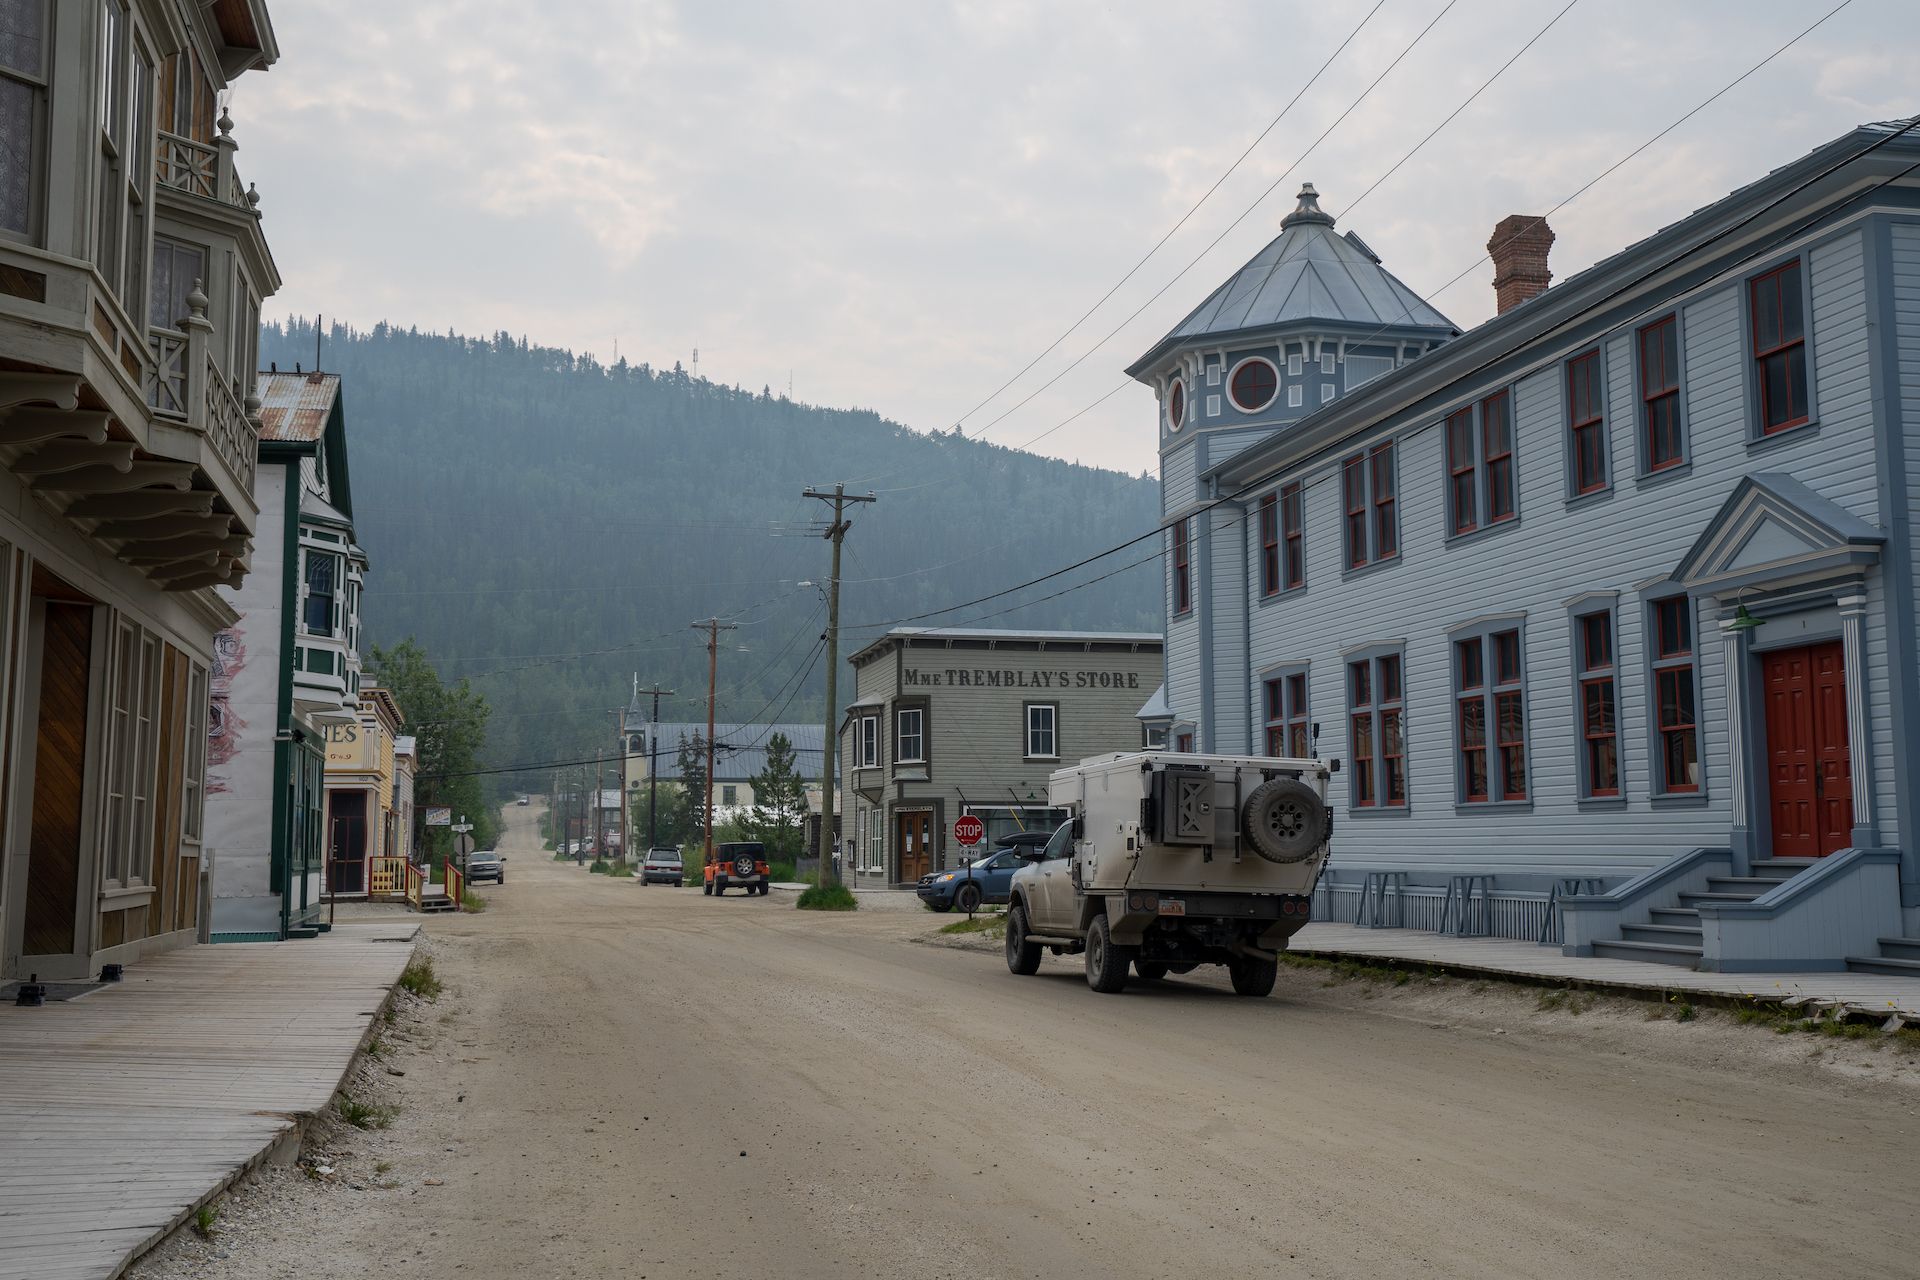 The town was a base during the 19th Klondike gold rush and it still has several preserved frontier-style buildings